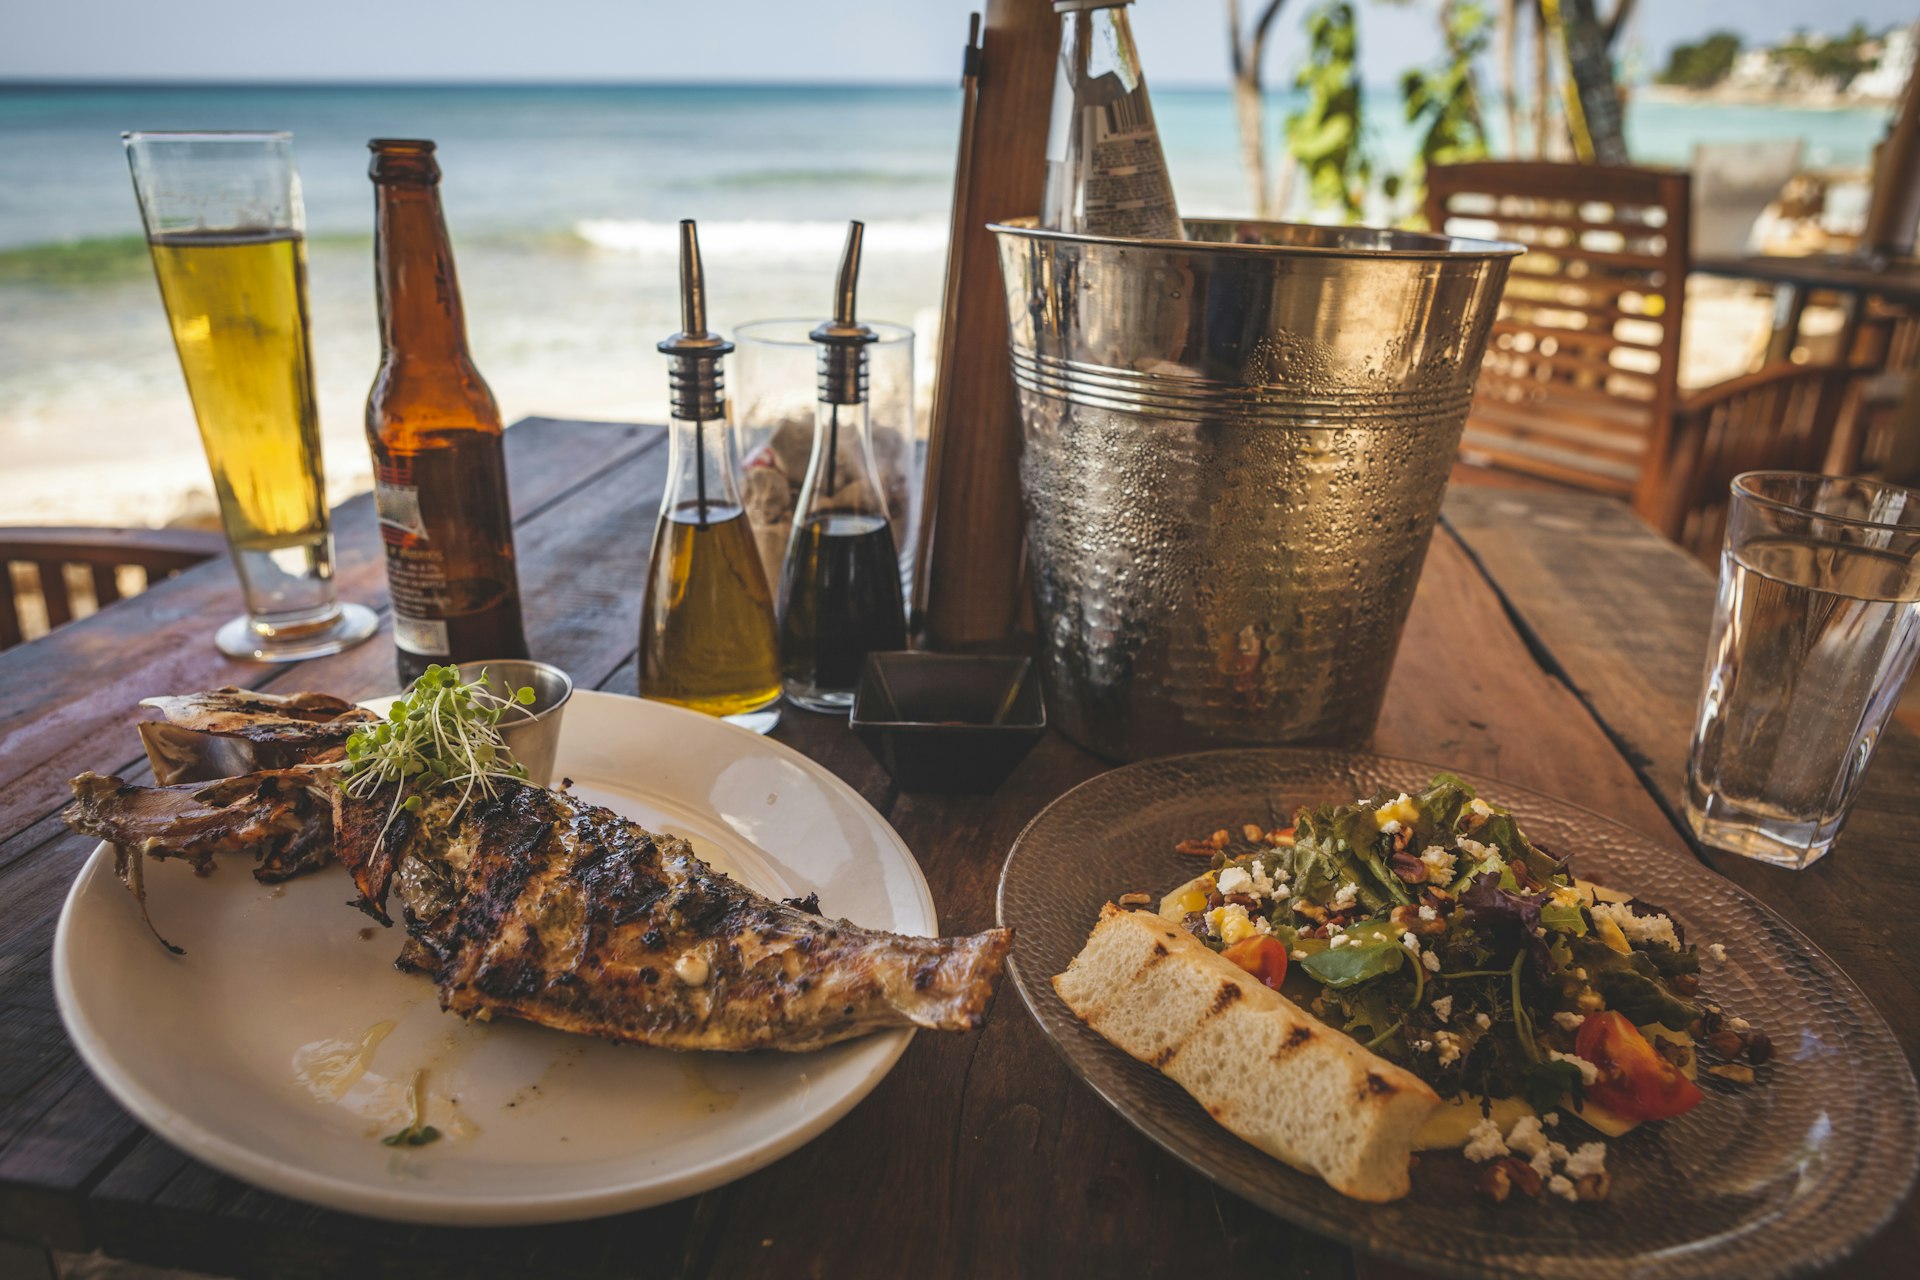 Grilled fish and salad lunch layed out on a beachside table in Barbados 